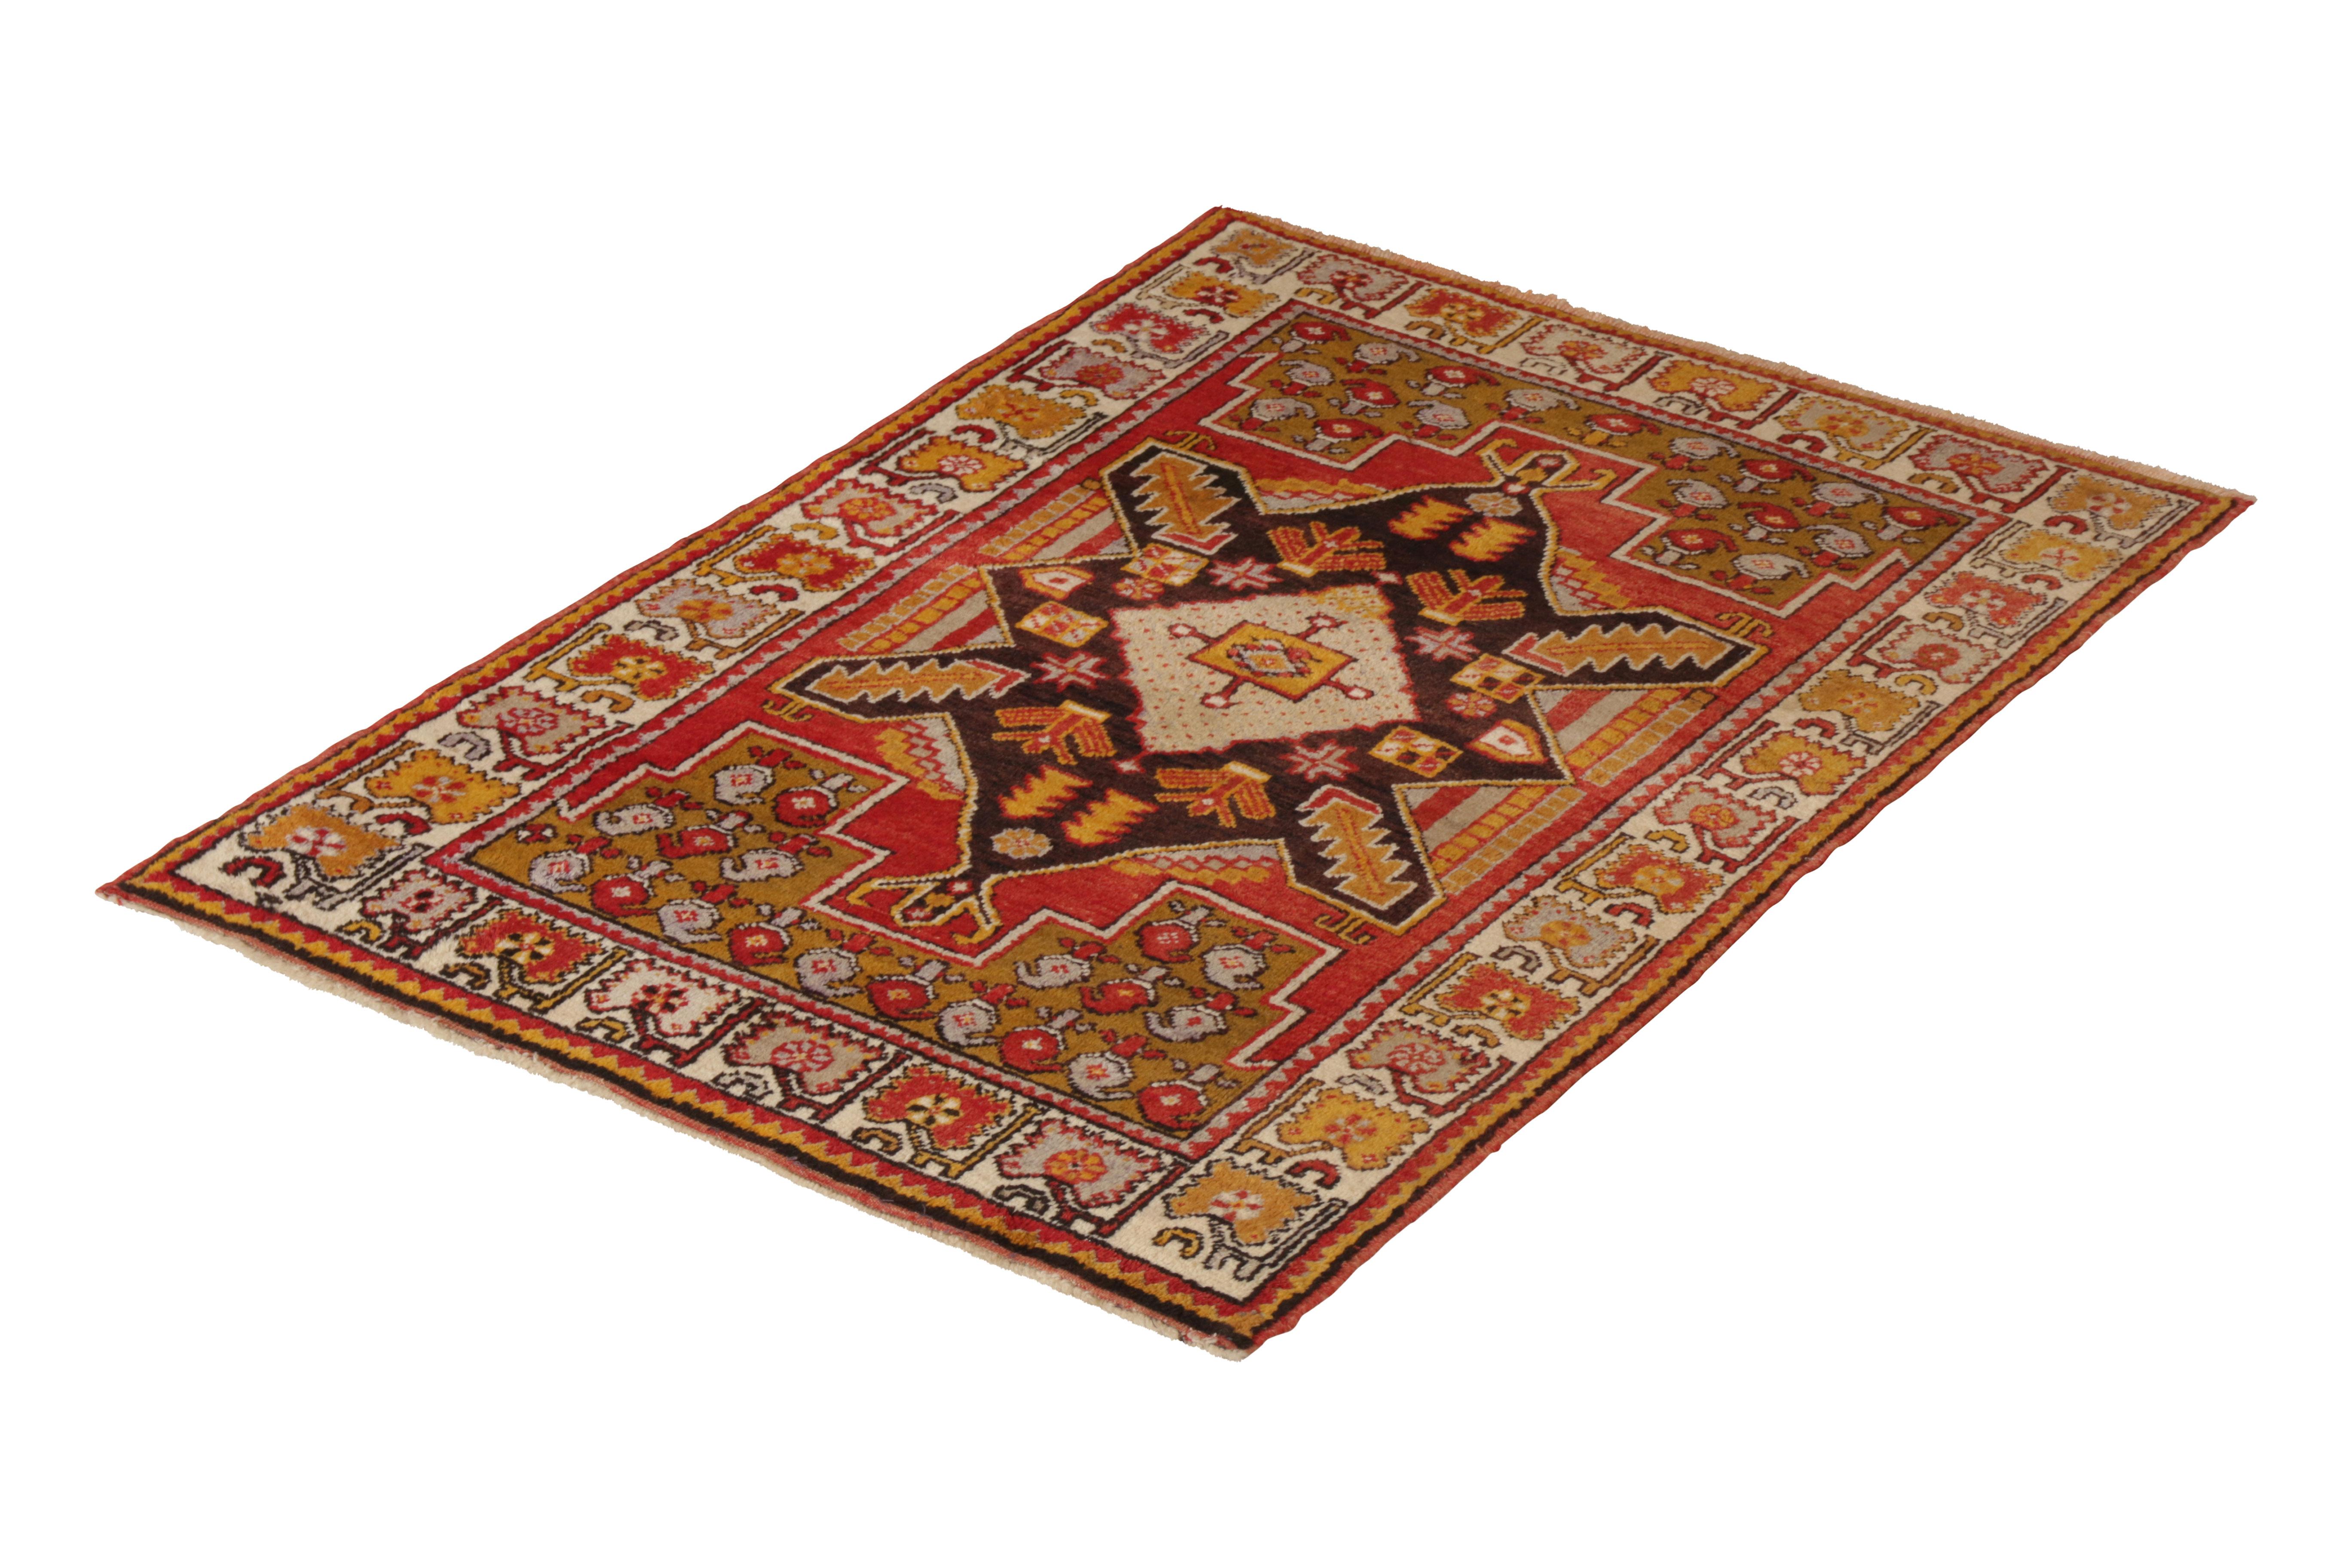 Hand knotted in wool originating from Turkey circa 1910-1920, this antique rug connotes a transitional Kirsehir rug design, named for the titular tribal rug style birthing intricate beauties like that of this uncommon 3x5 sized Kirsehir rug of rich